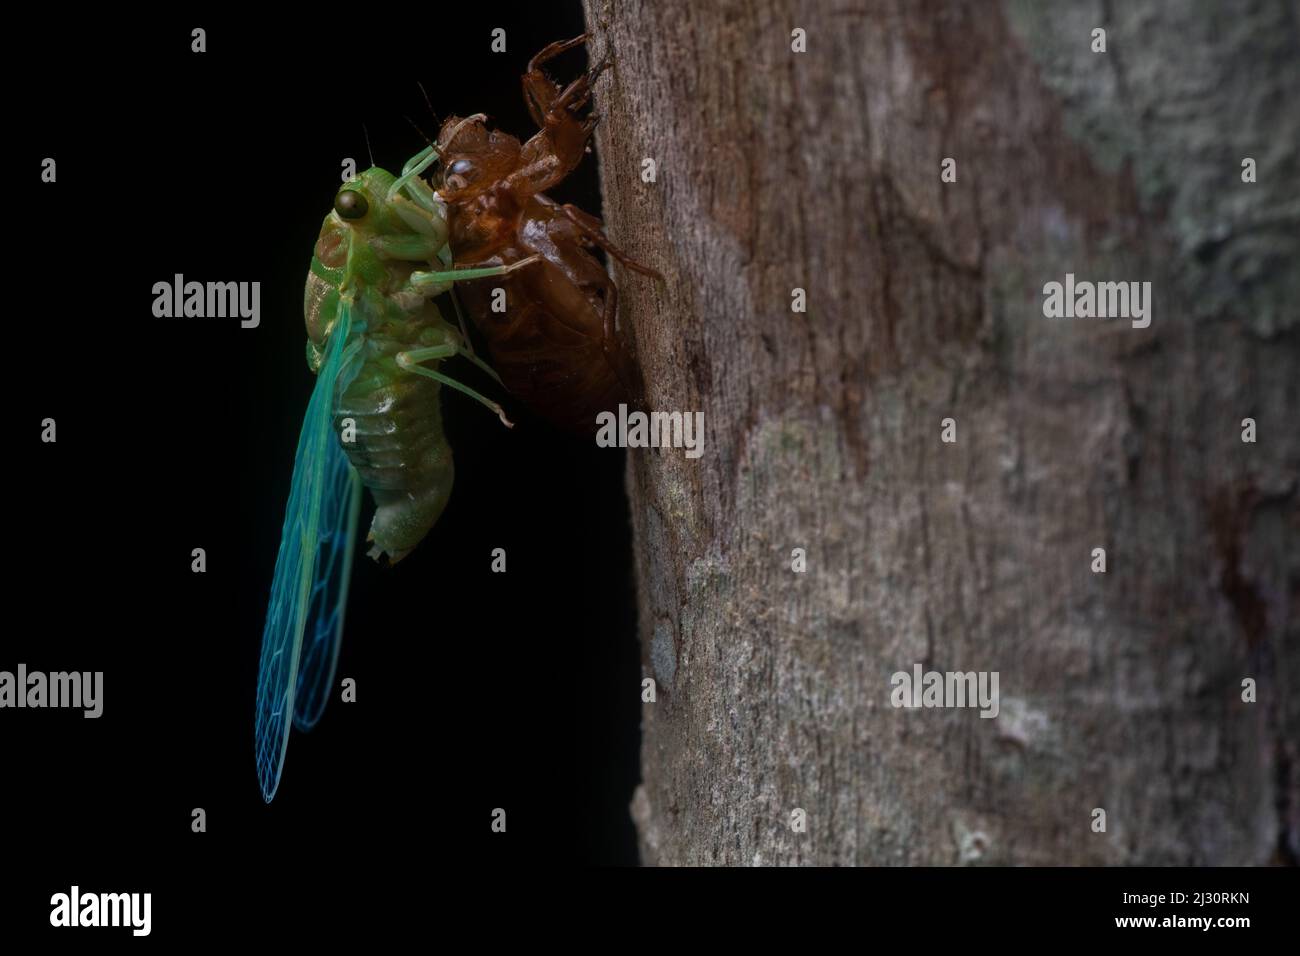 Under cover of night, a cicada sheds its old exoskeleton and starts its adult life in the rainforest. Stock Photo